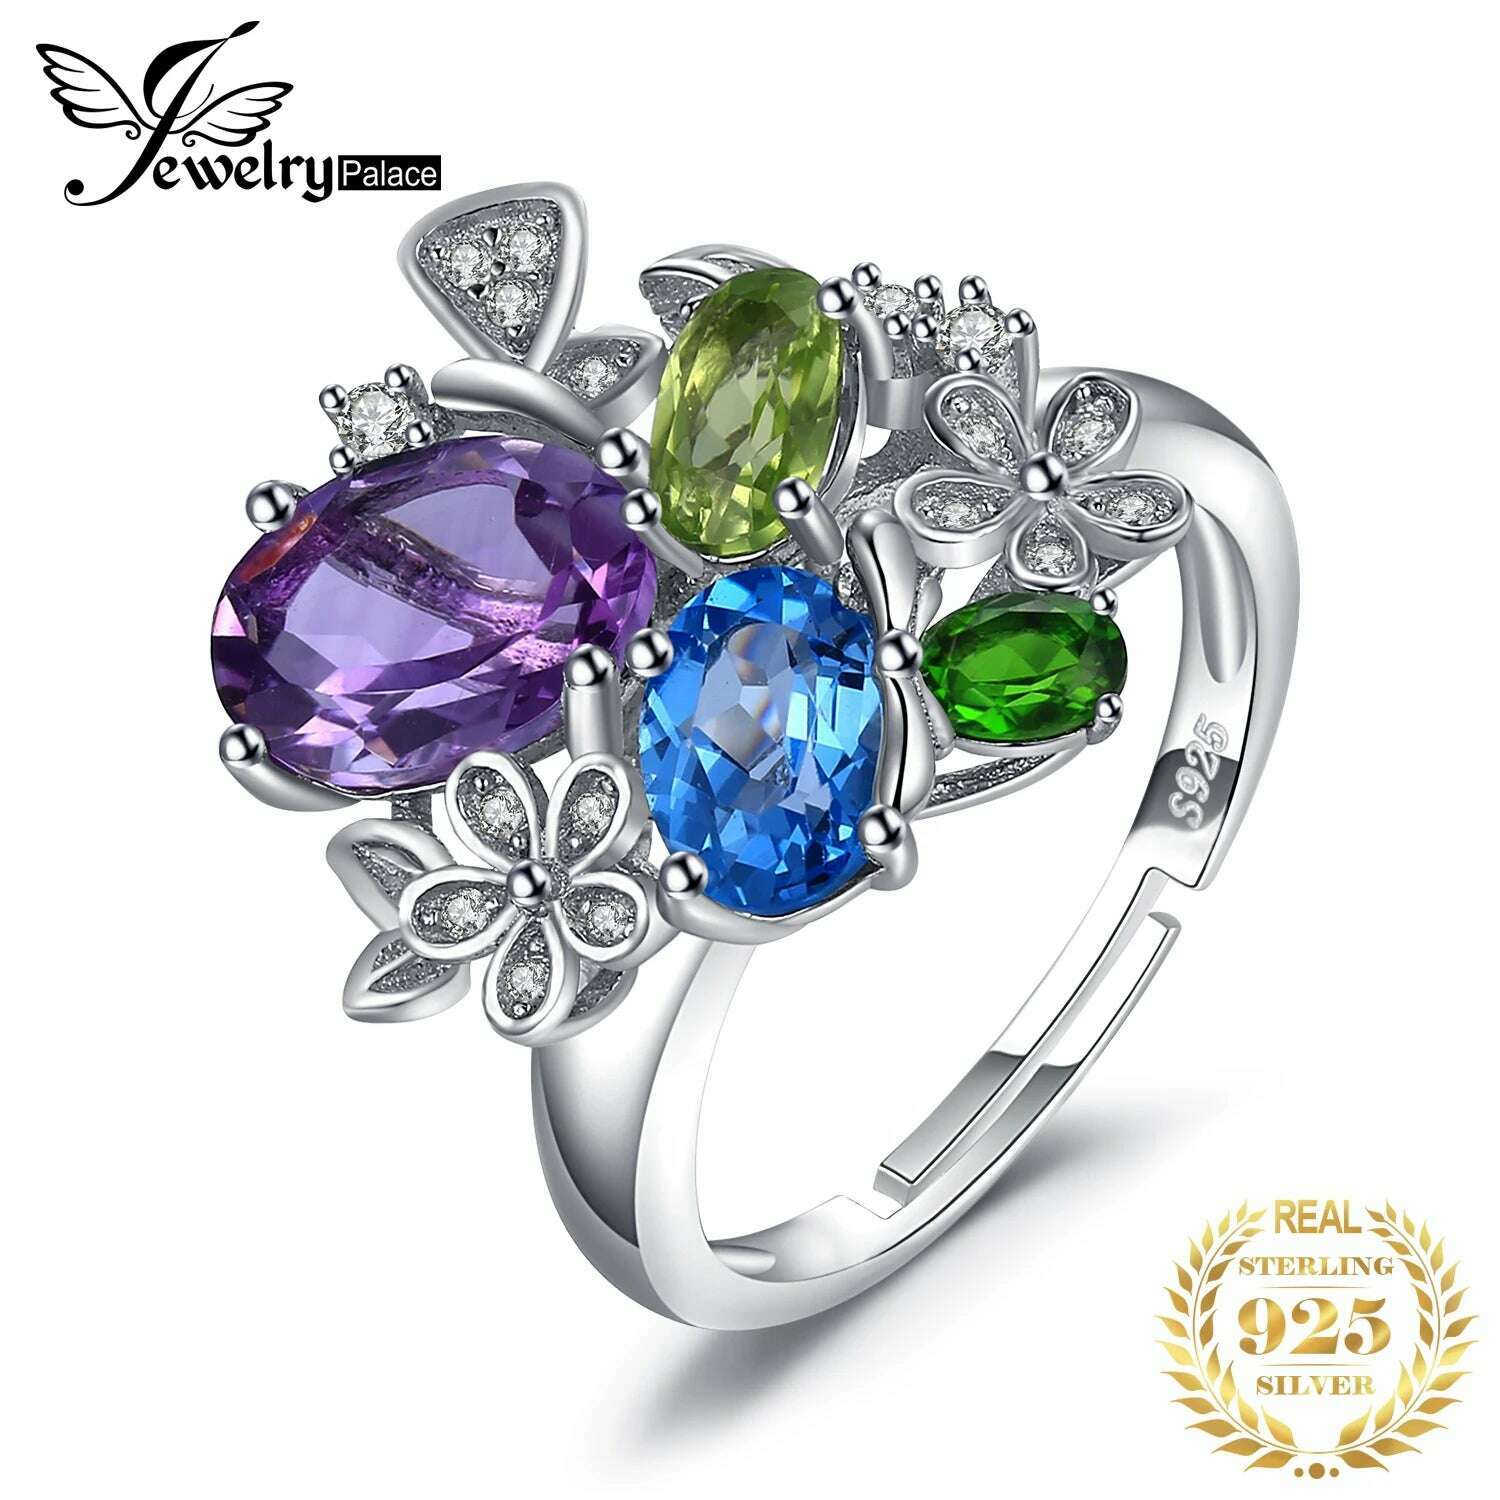 KIMLUD, JewelryPalace Flower Natural Amethyst Blue Topaz Peridot Chrome Diopside Open Adjustable Cocktail Ring 925 Sterling Silver Women, resizable, KIMLUD Women's Clothes